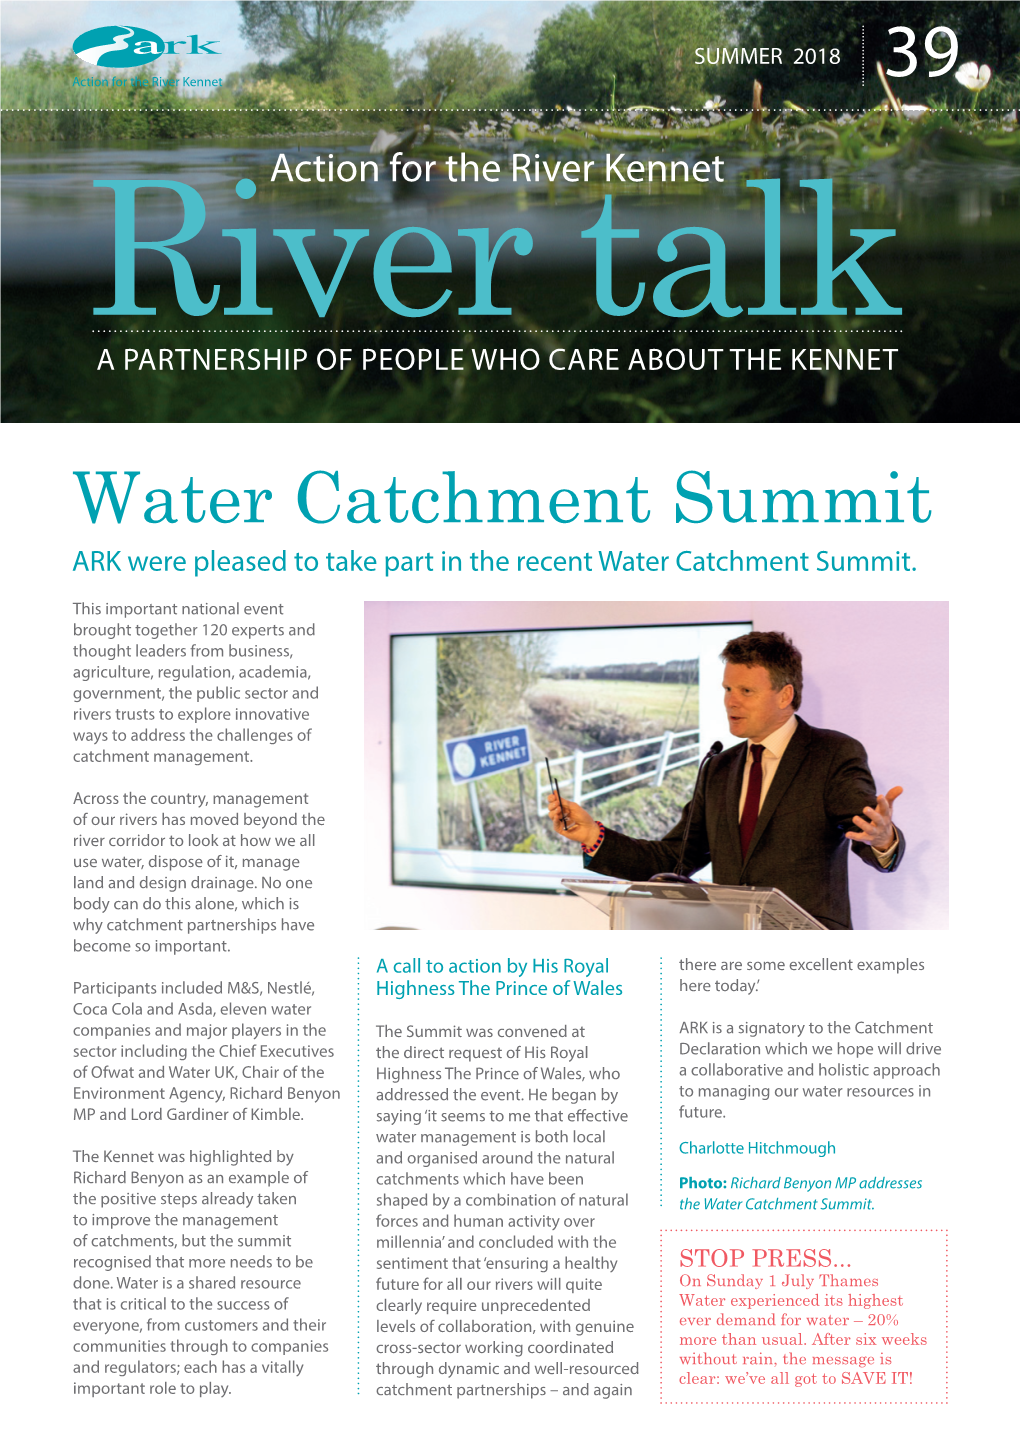 Water Catchment Summit ARK Were Pleased to Take Part in the Recent Water Catchment Summit